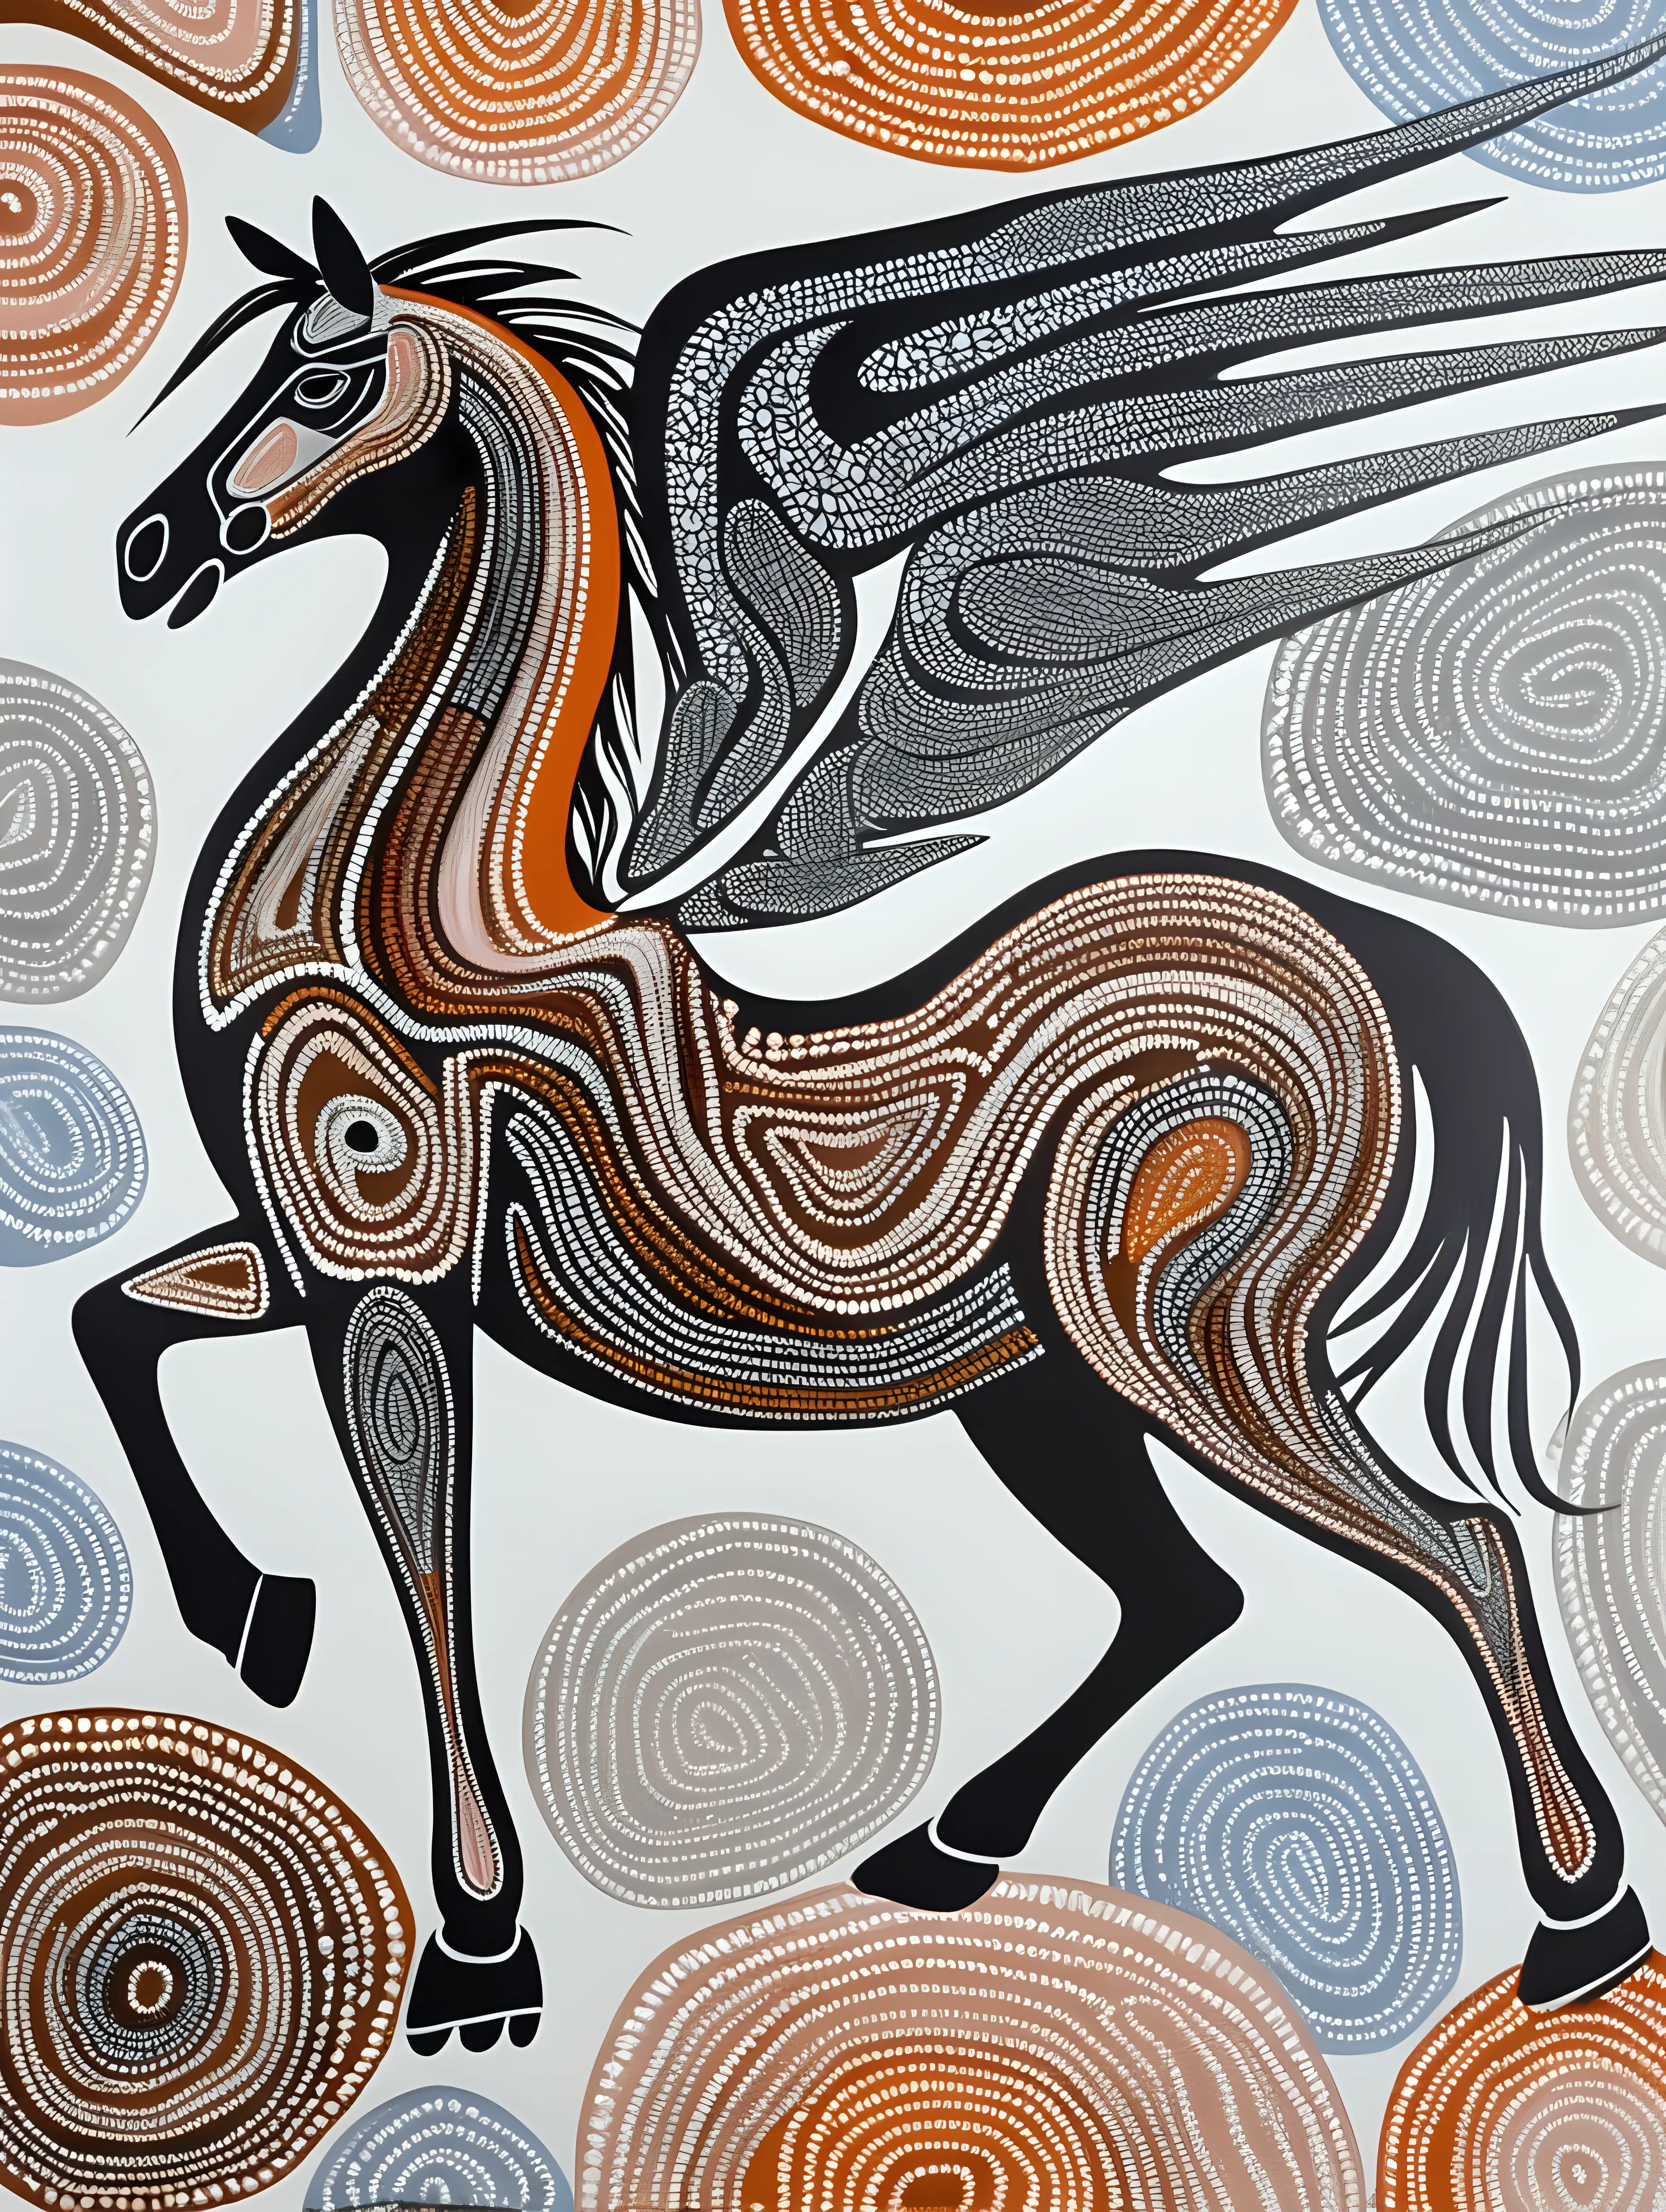 modern-australian aboriginal-art-in-earthy-colors-with-white background, black, pink-grey blue-orange-brown-white - grey-with-a-pegasus